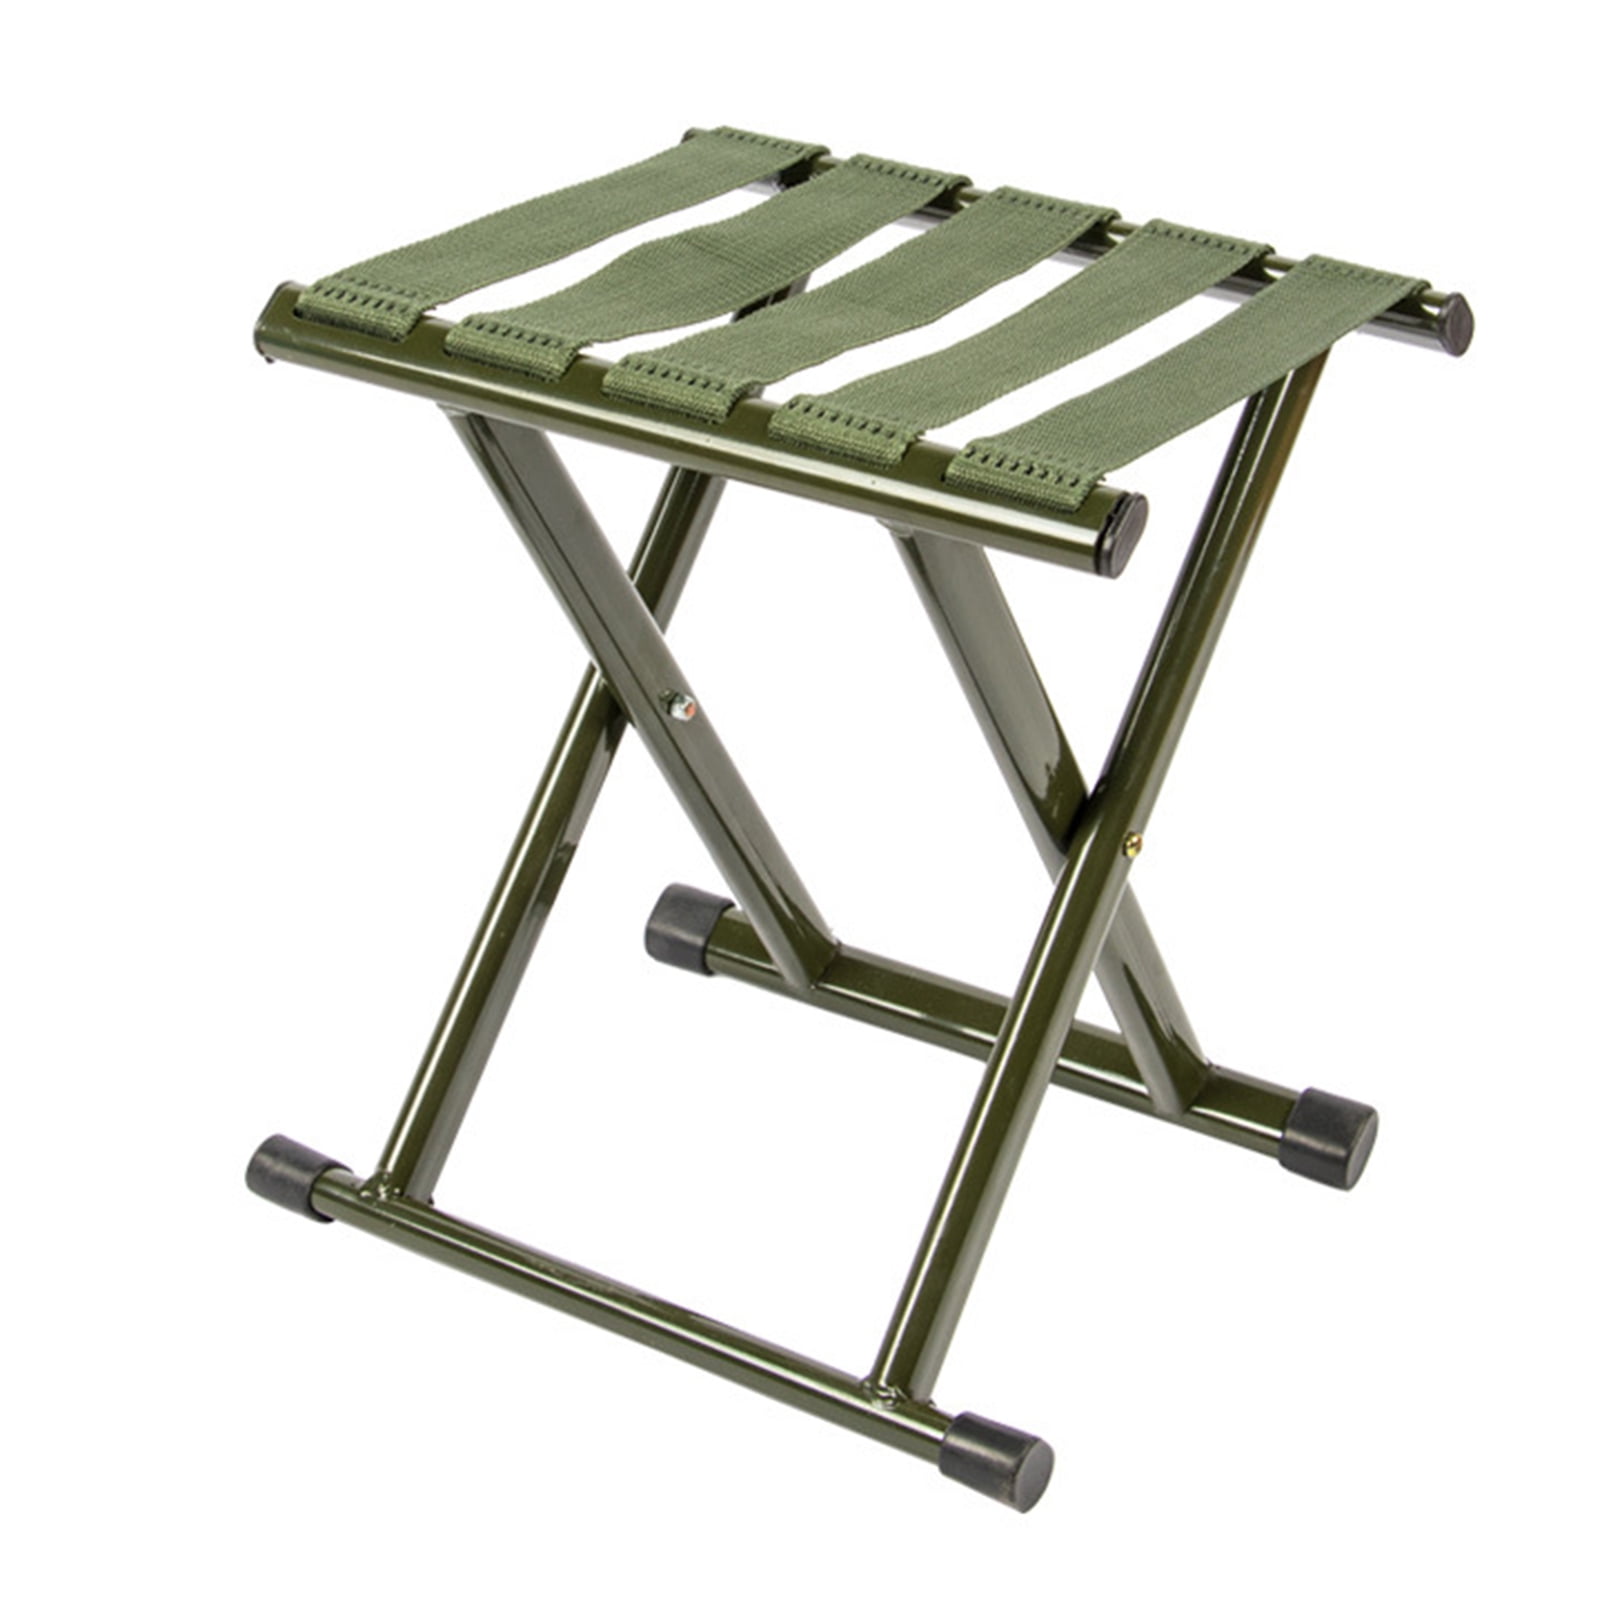 Portable Folding Stool Camping Chair Beach Seat For Outdoor Garden Fishing BBQ 